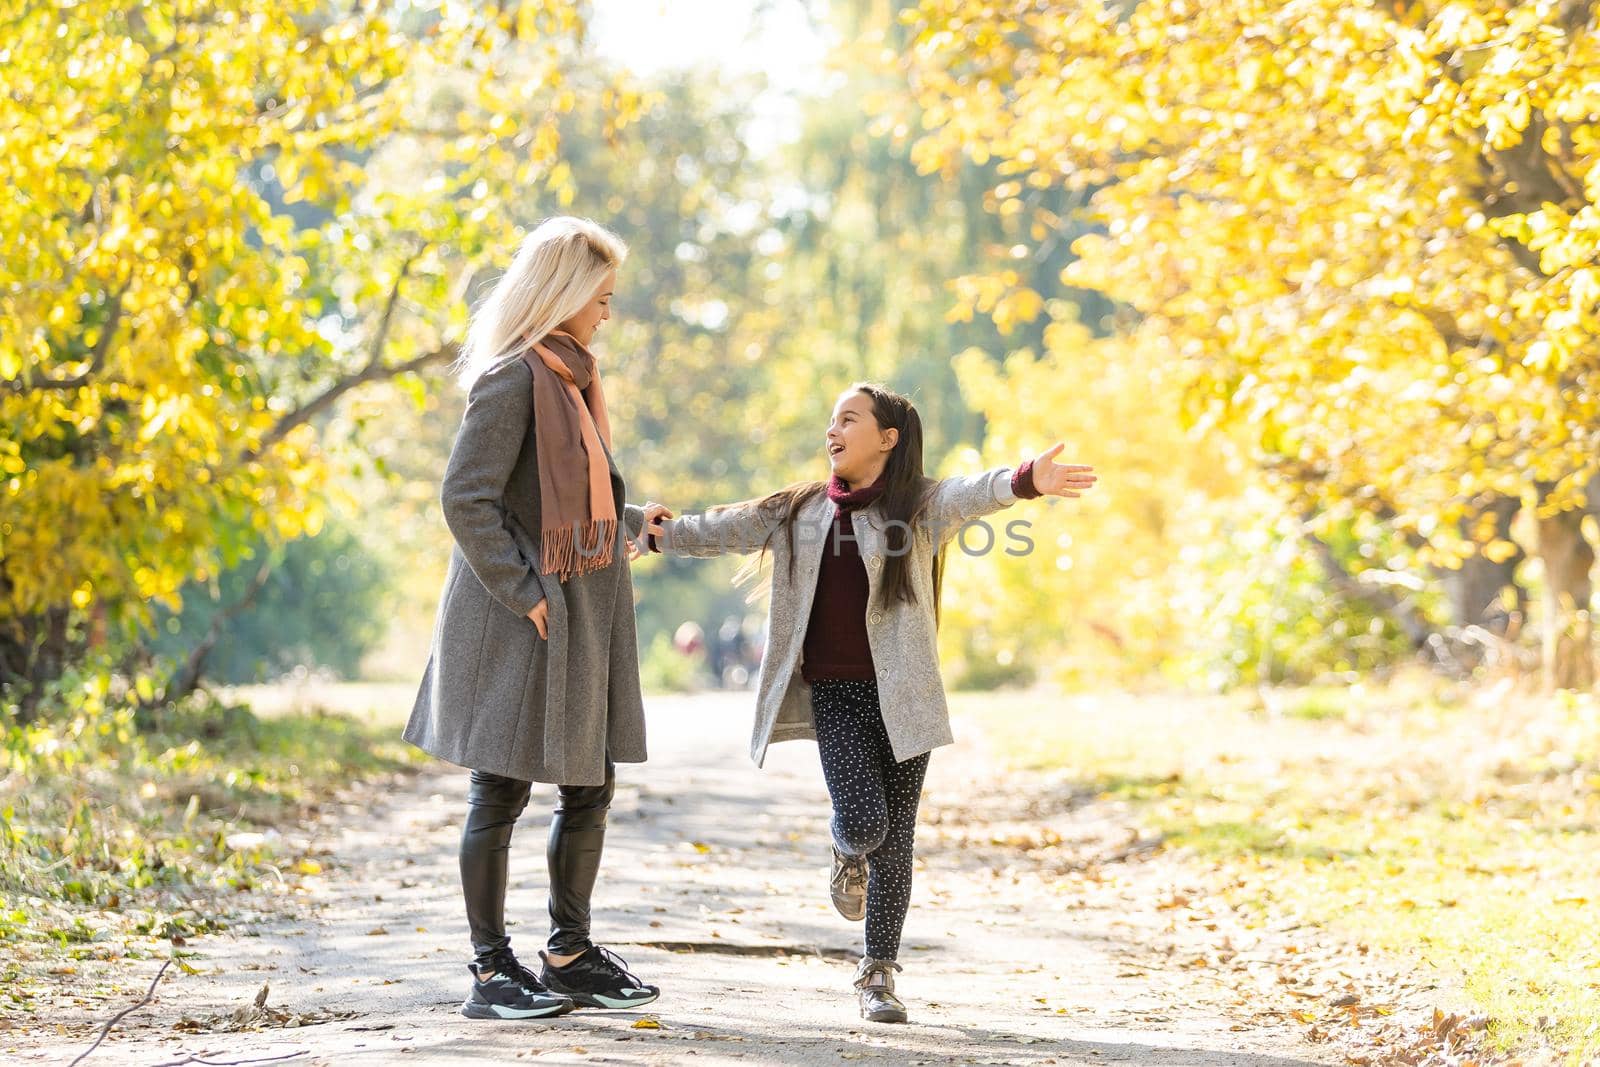 Little girl and her mother enjoy sunny weather in the autumn park by Andelov13